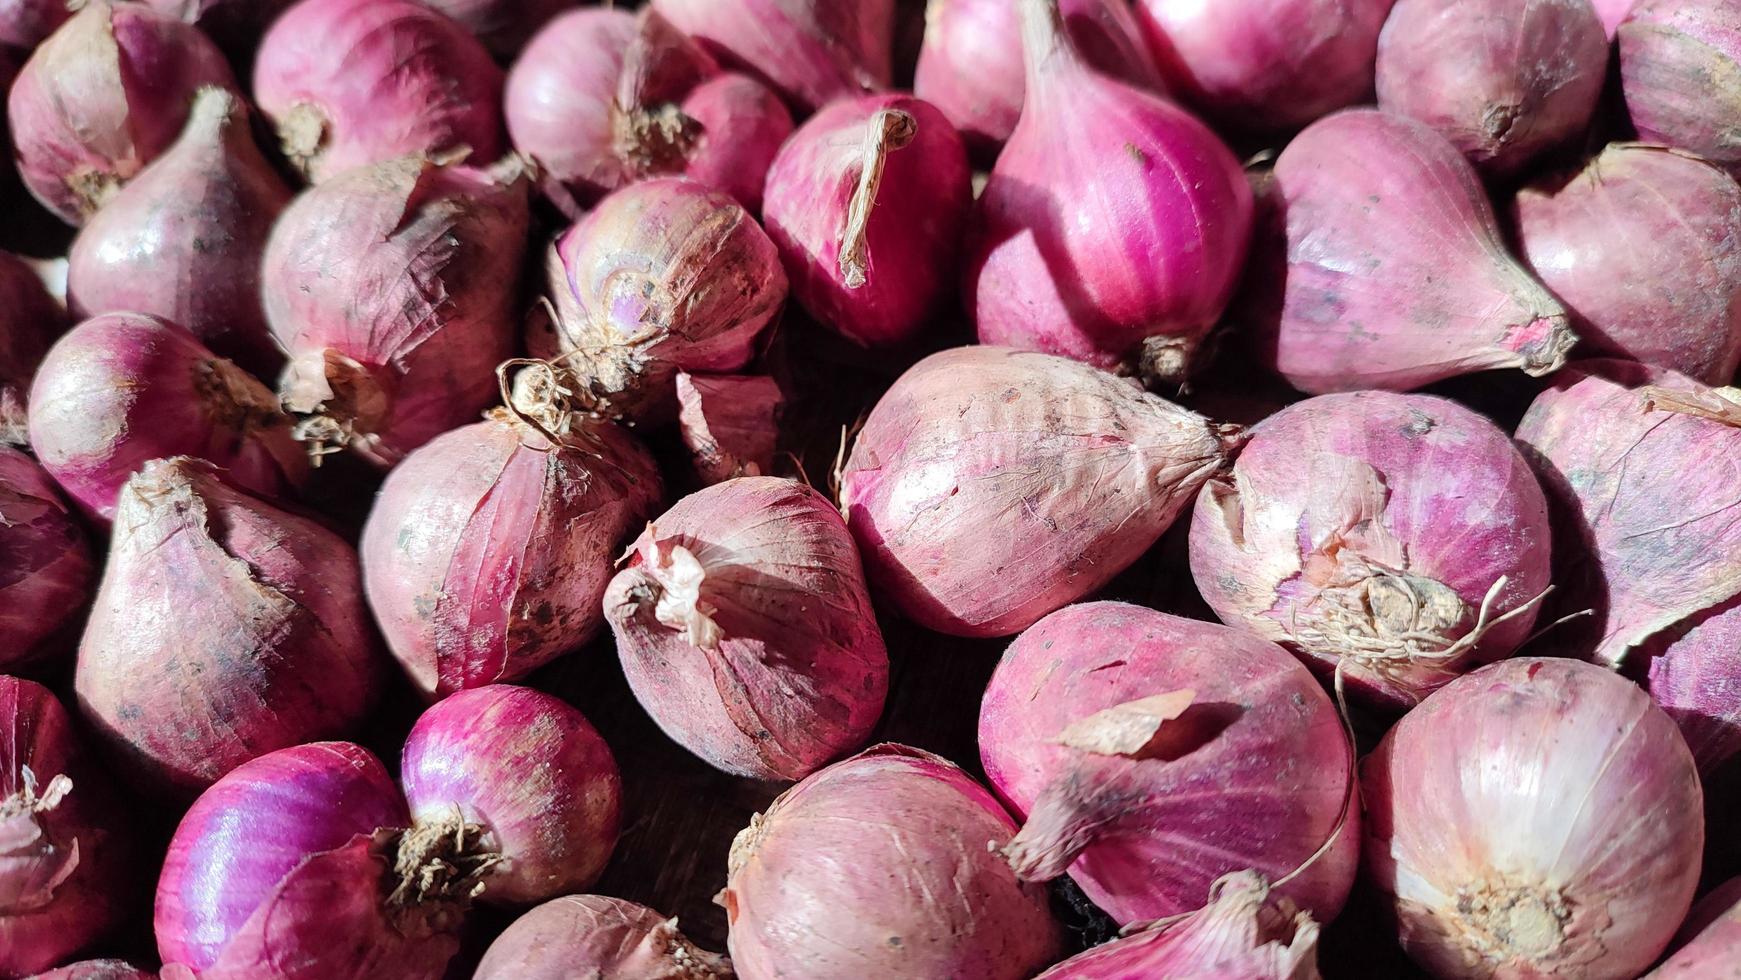 Fresh onion. Texture, background. Red onion, close up photo